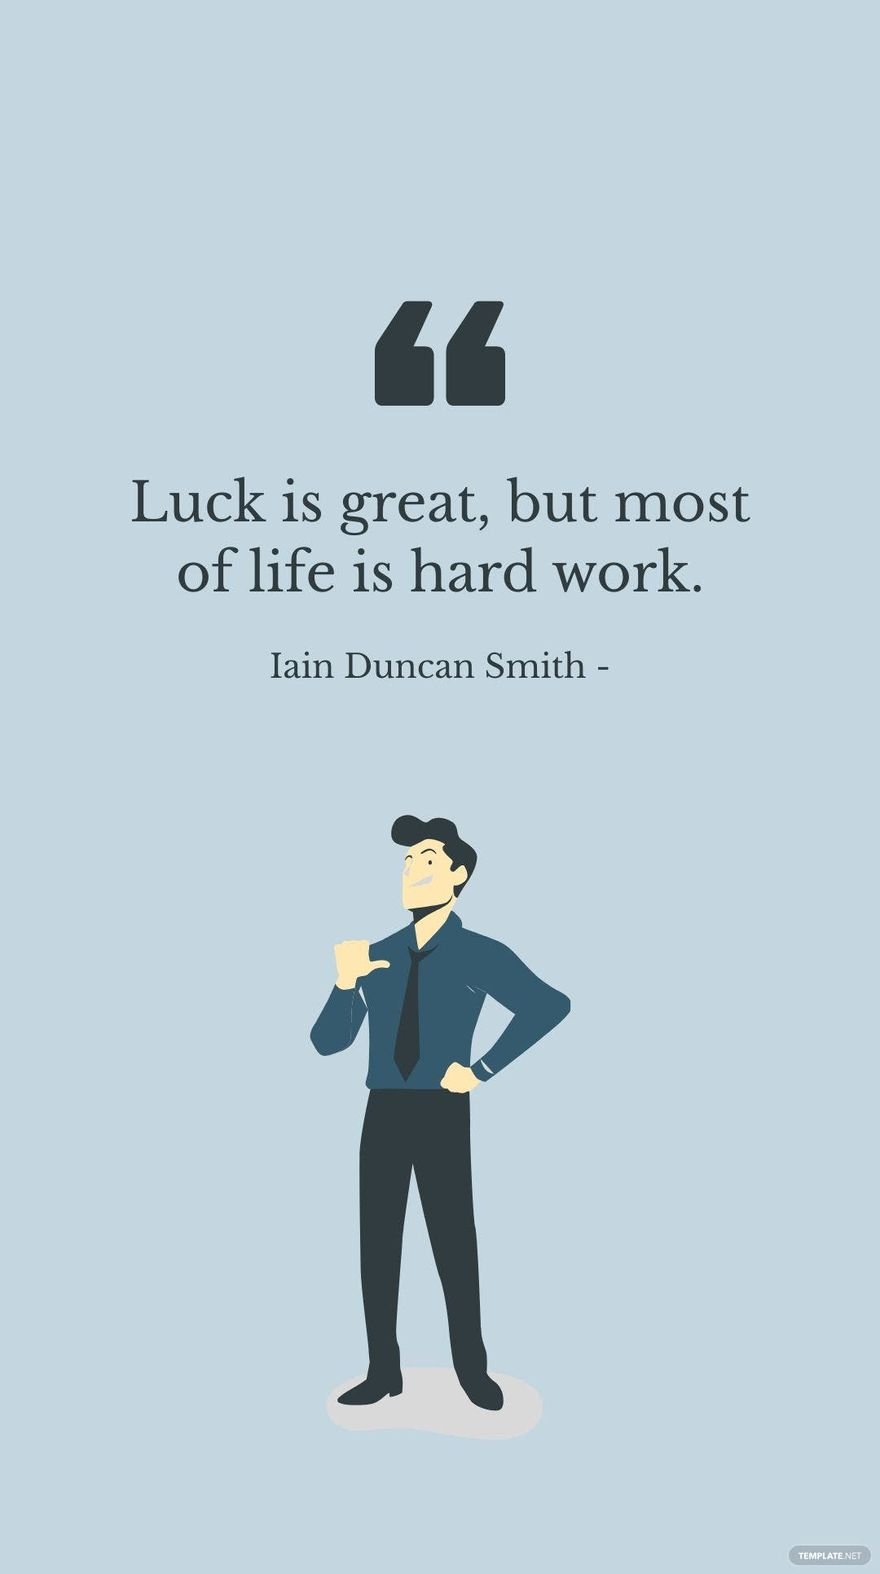 Free Iain Duncan Smith - Luck is great, but most of life is hard work. in JPG